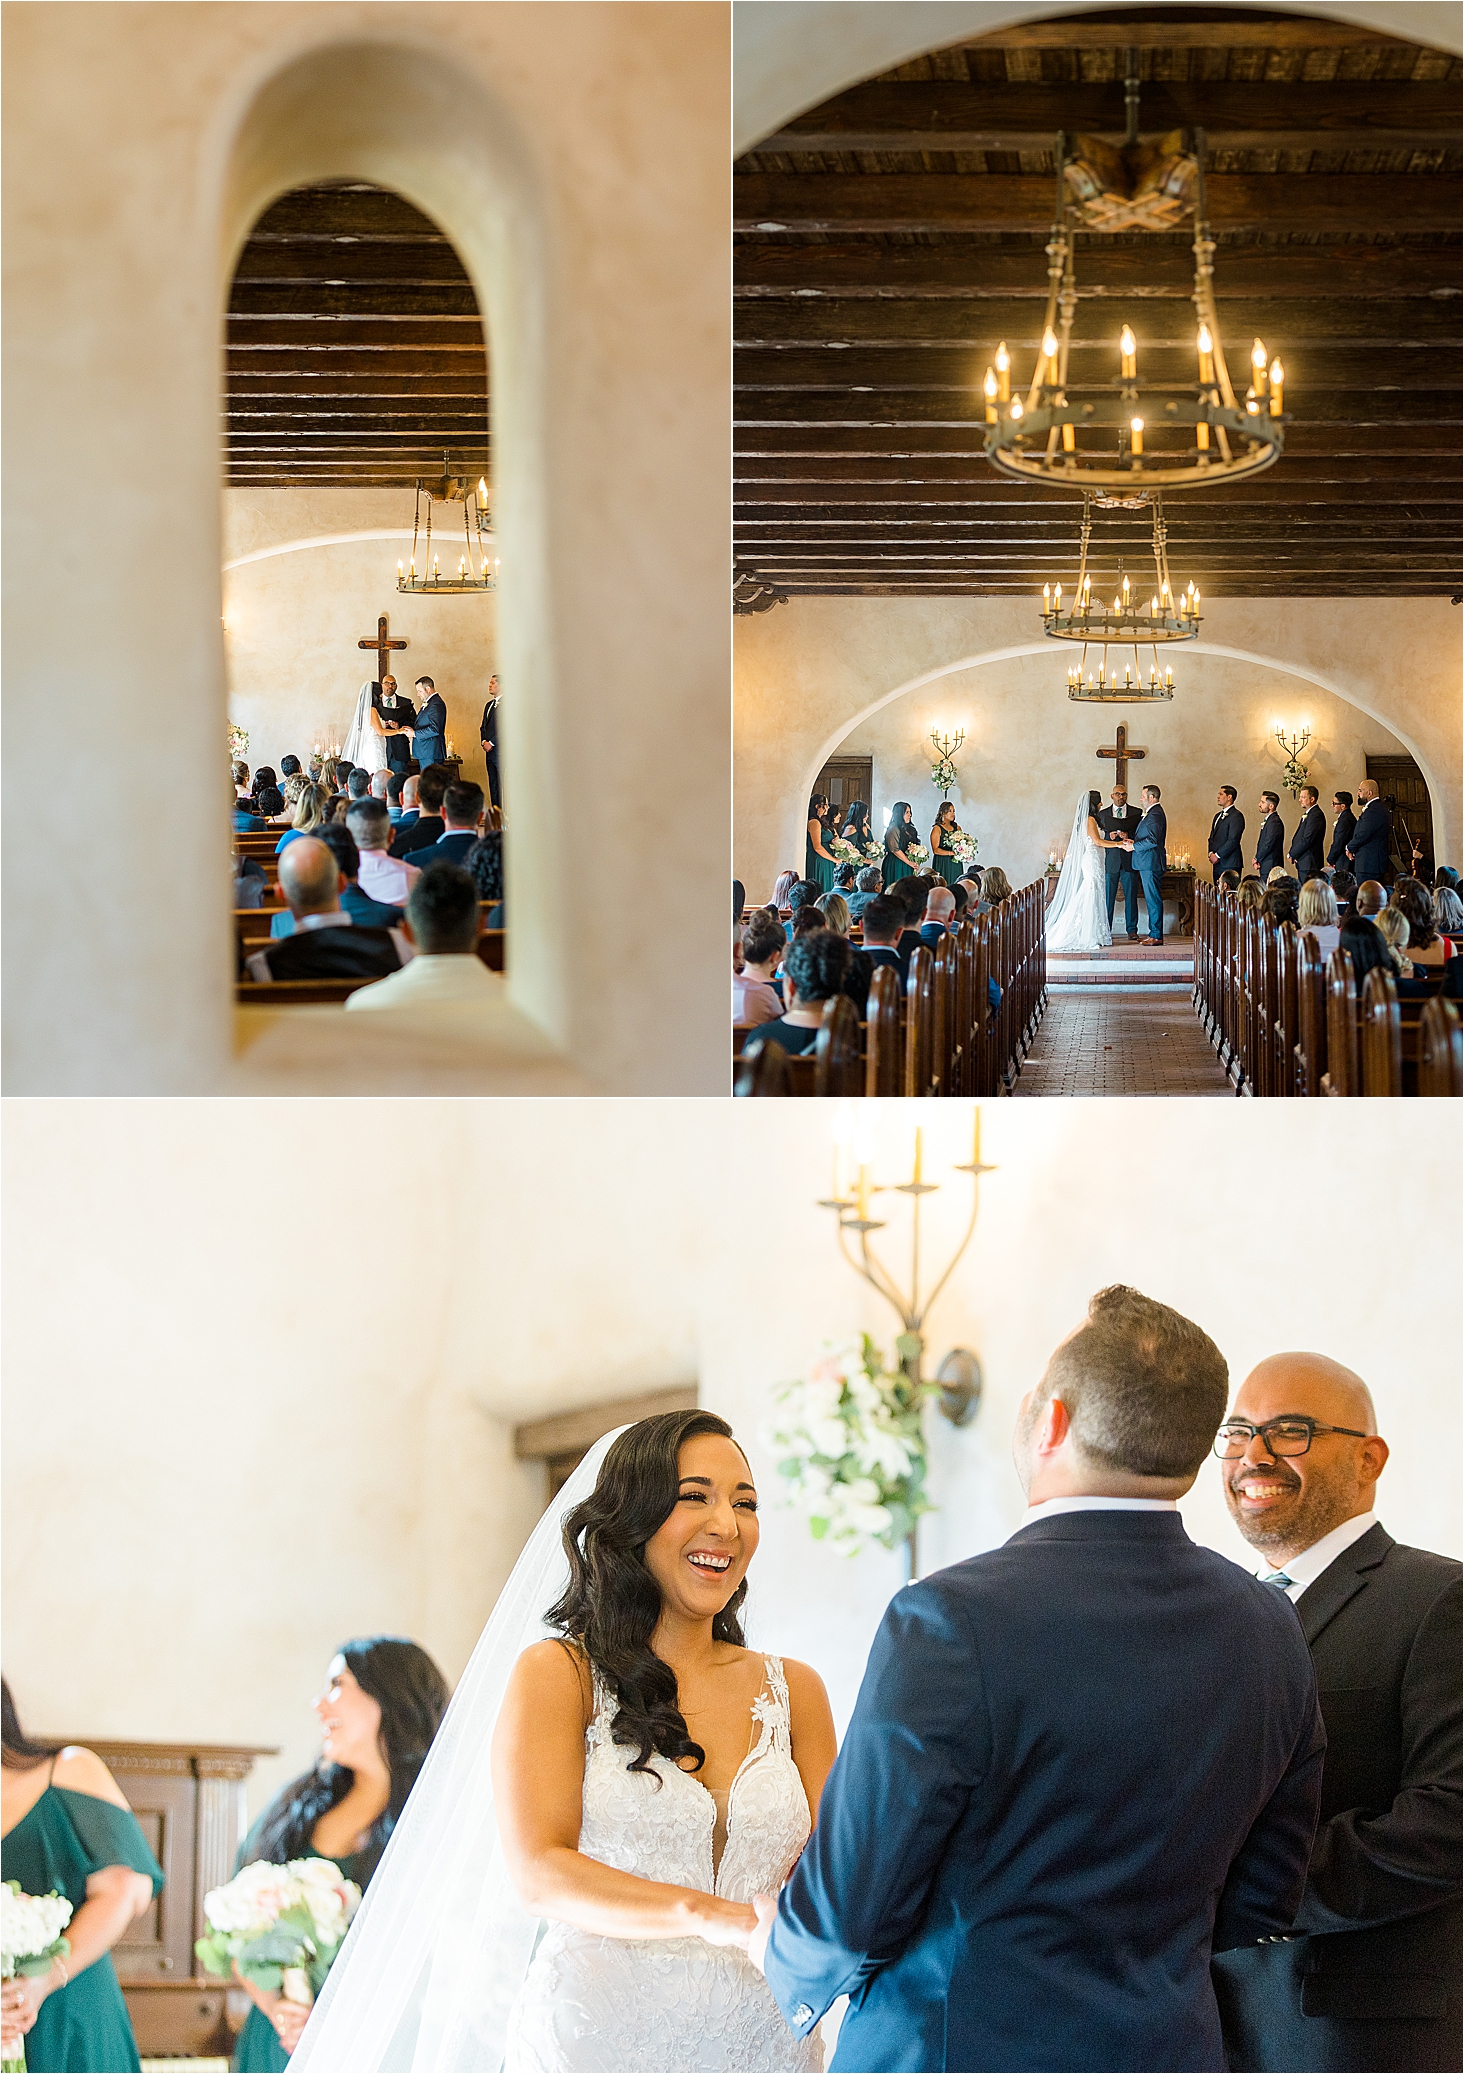 A peek of the wedding ceremony through a cut out in the chapel at Lost Mission, A mission-style venue near San Antonio, Texas 